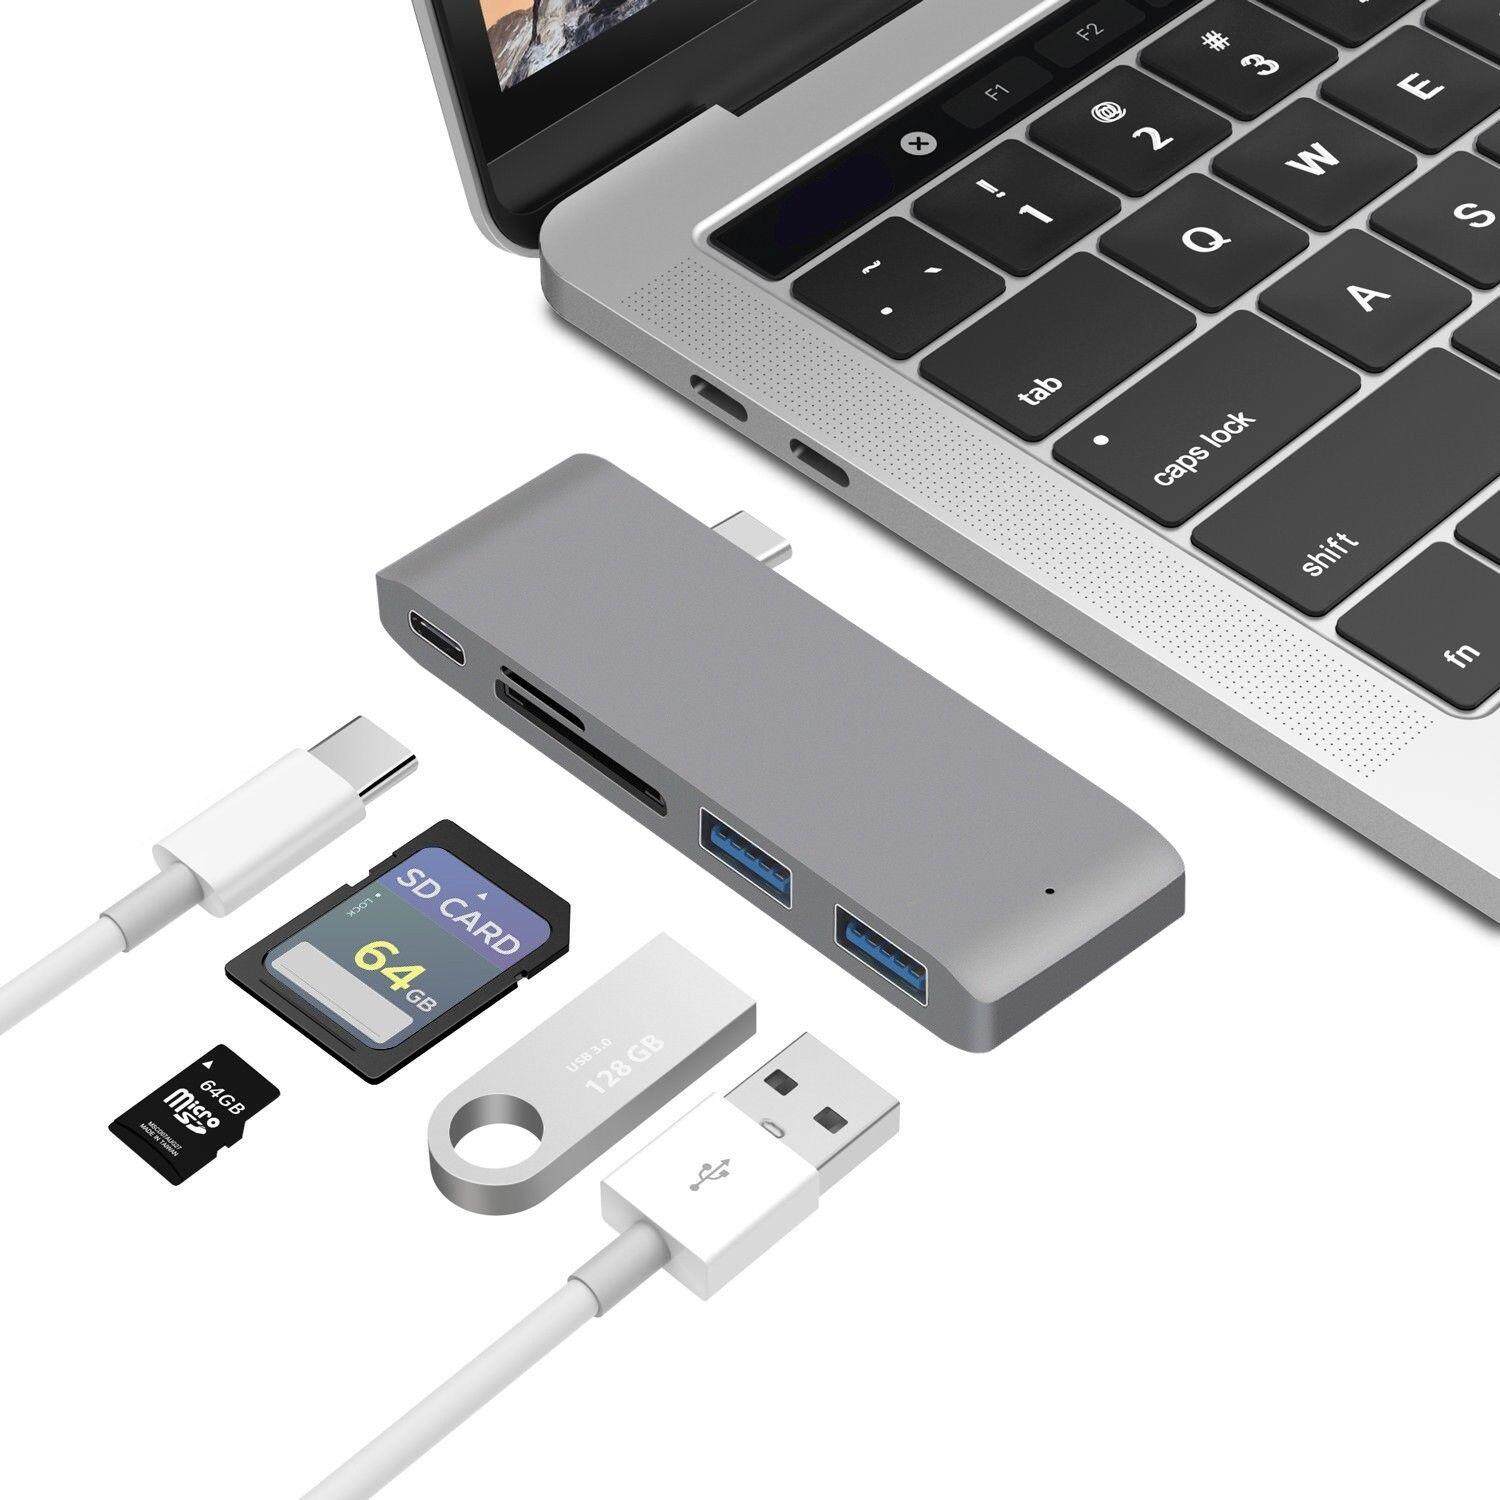 Type-C Adapter 5in1 USB C Hub 3.0 Charging Data Sync Card Reader For MacBook Pro